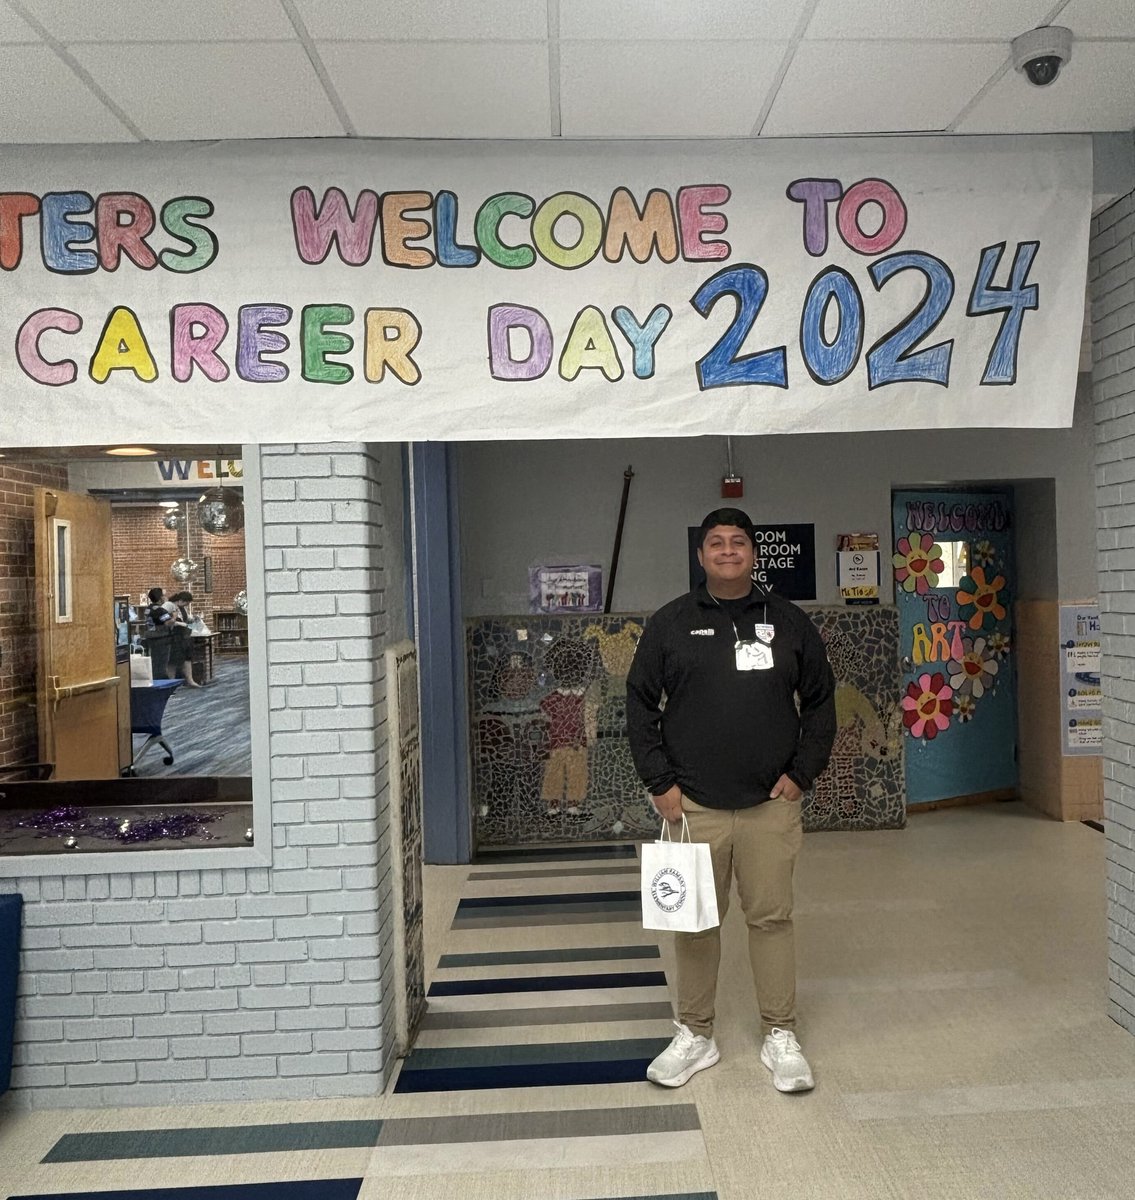 Coach Johnatan (ASA's Outreach & School Programs Manager, in addition to a coach!) participated in the William Ramsay career day today—talking with students about all of the great soccer related careers kids can aspire to! Great work Johnatan.